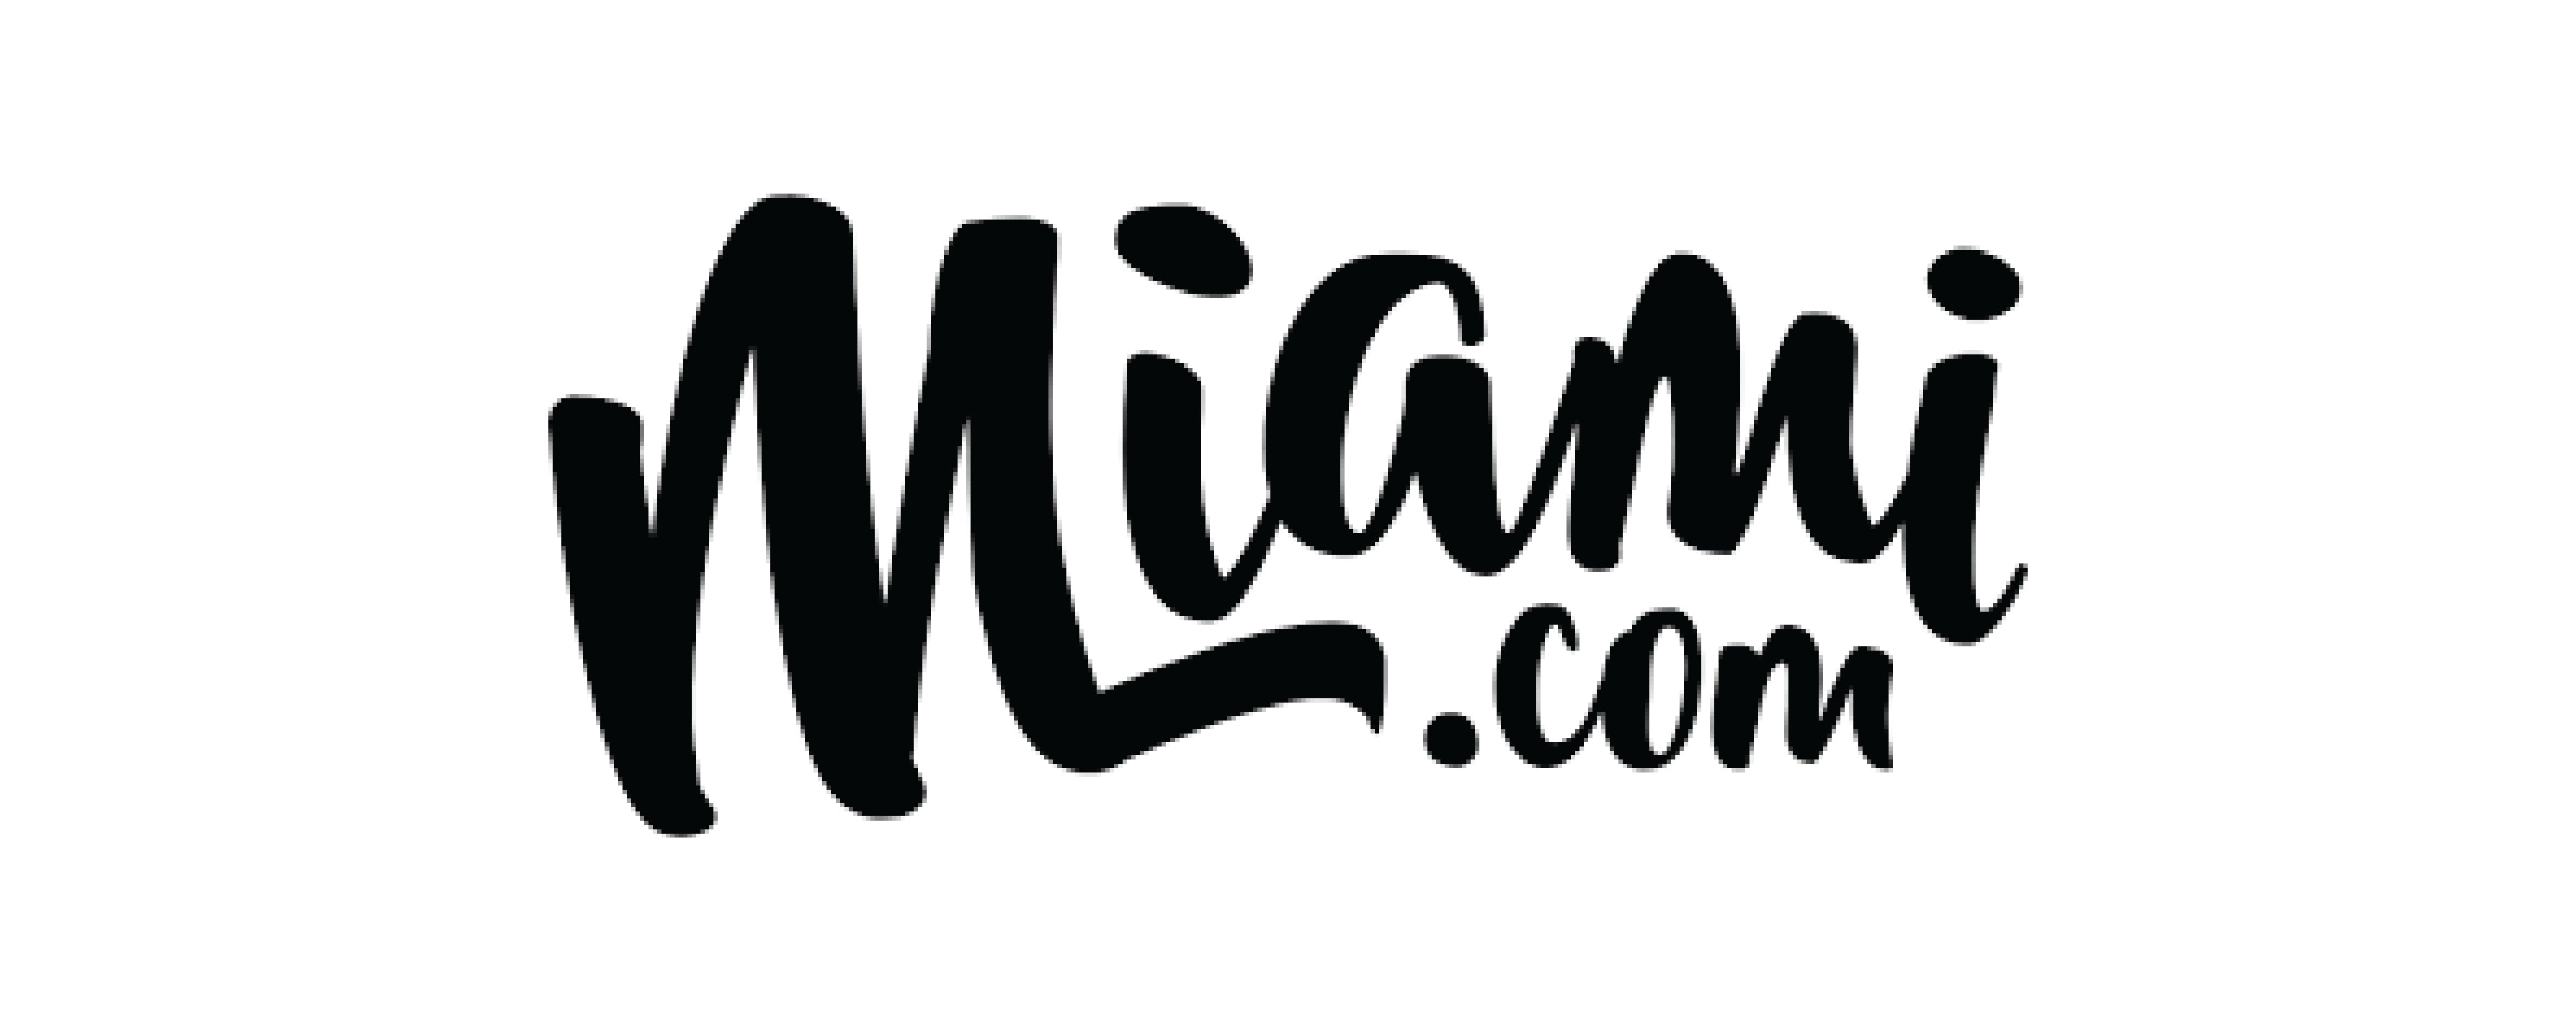 Miami.com - Cute, Cool and Affordable Gifts